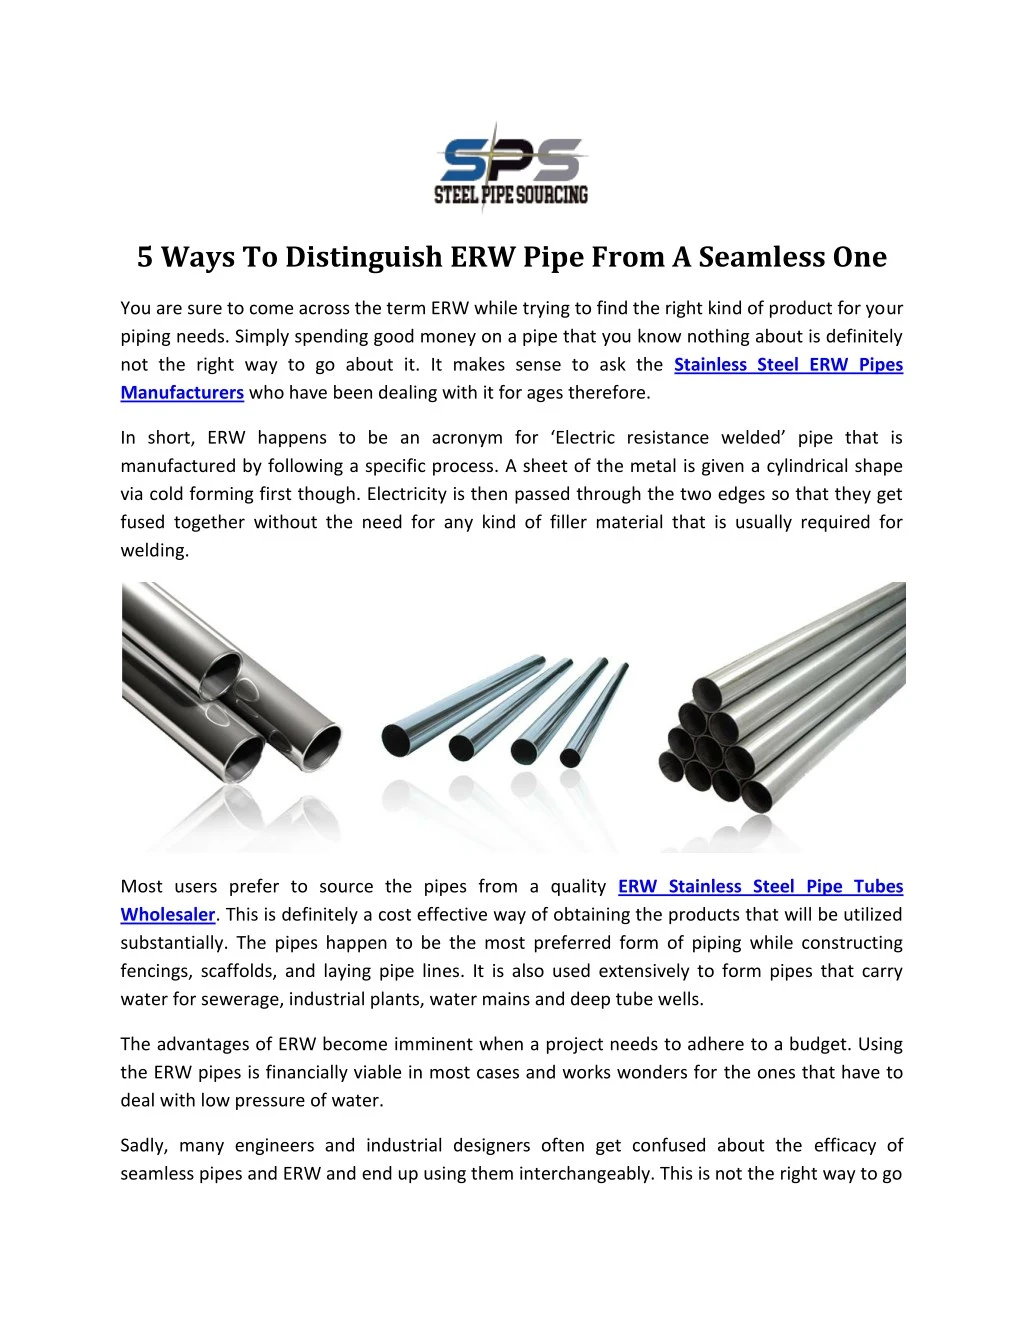 5 ways to distinguish erw pipe from a seamless one